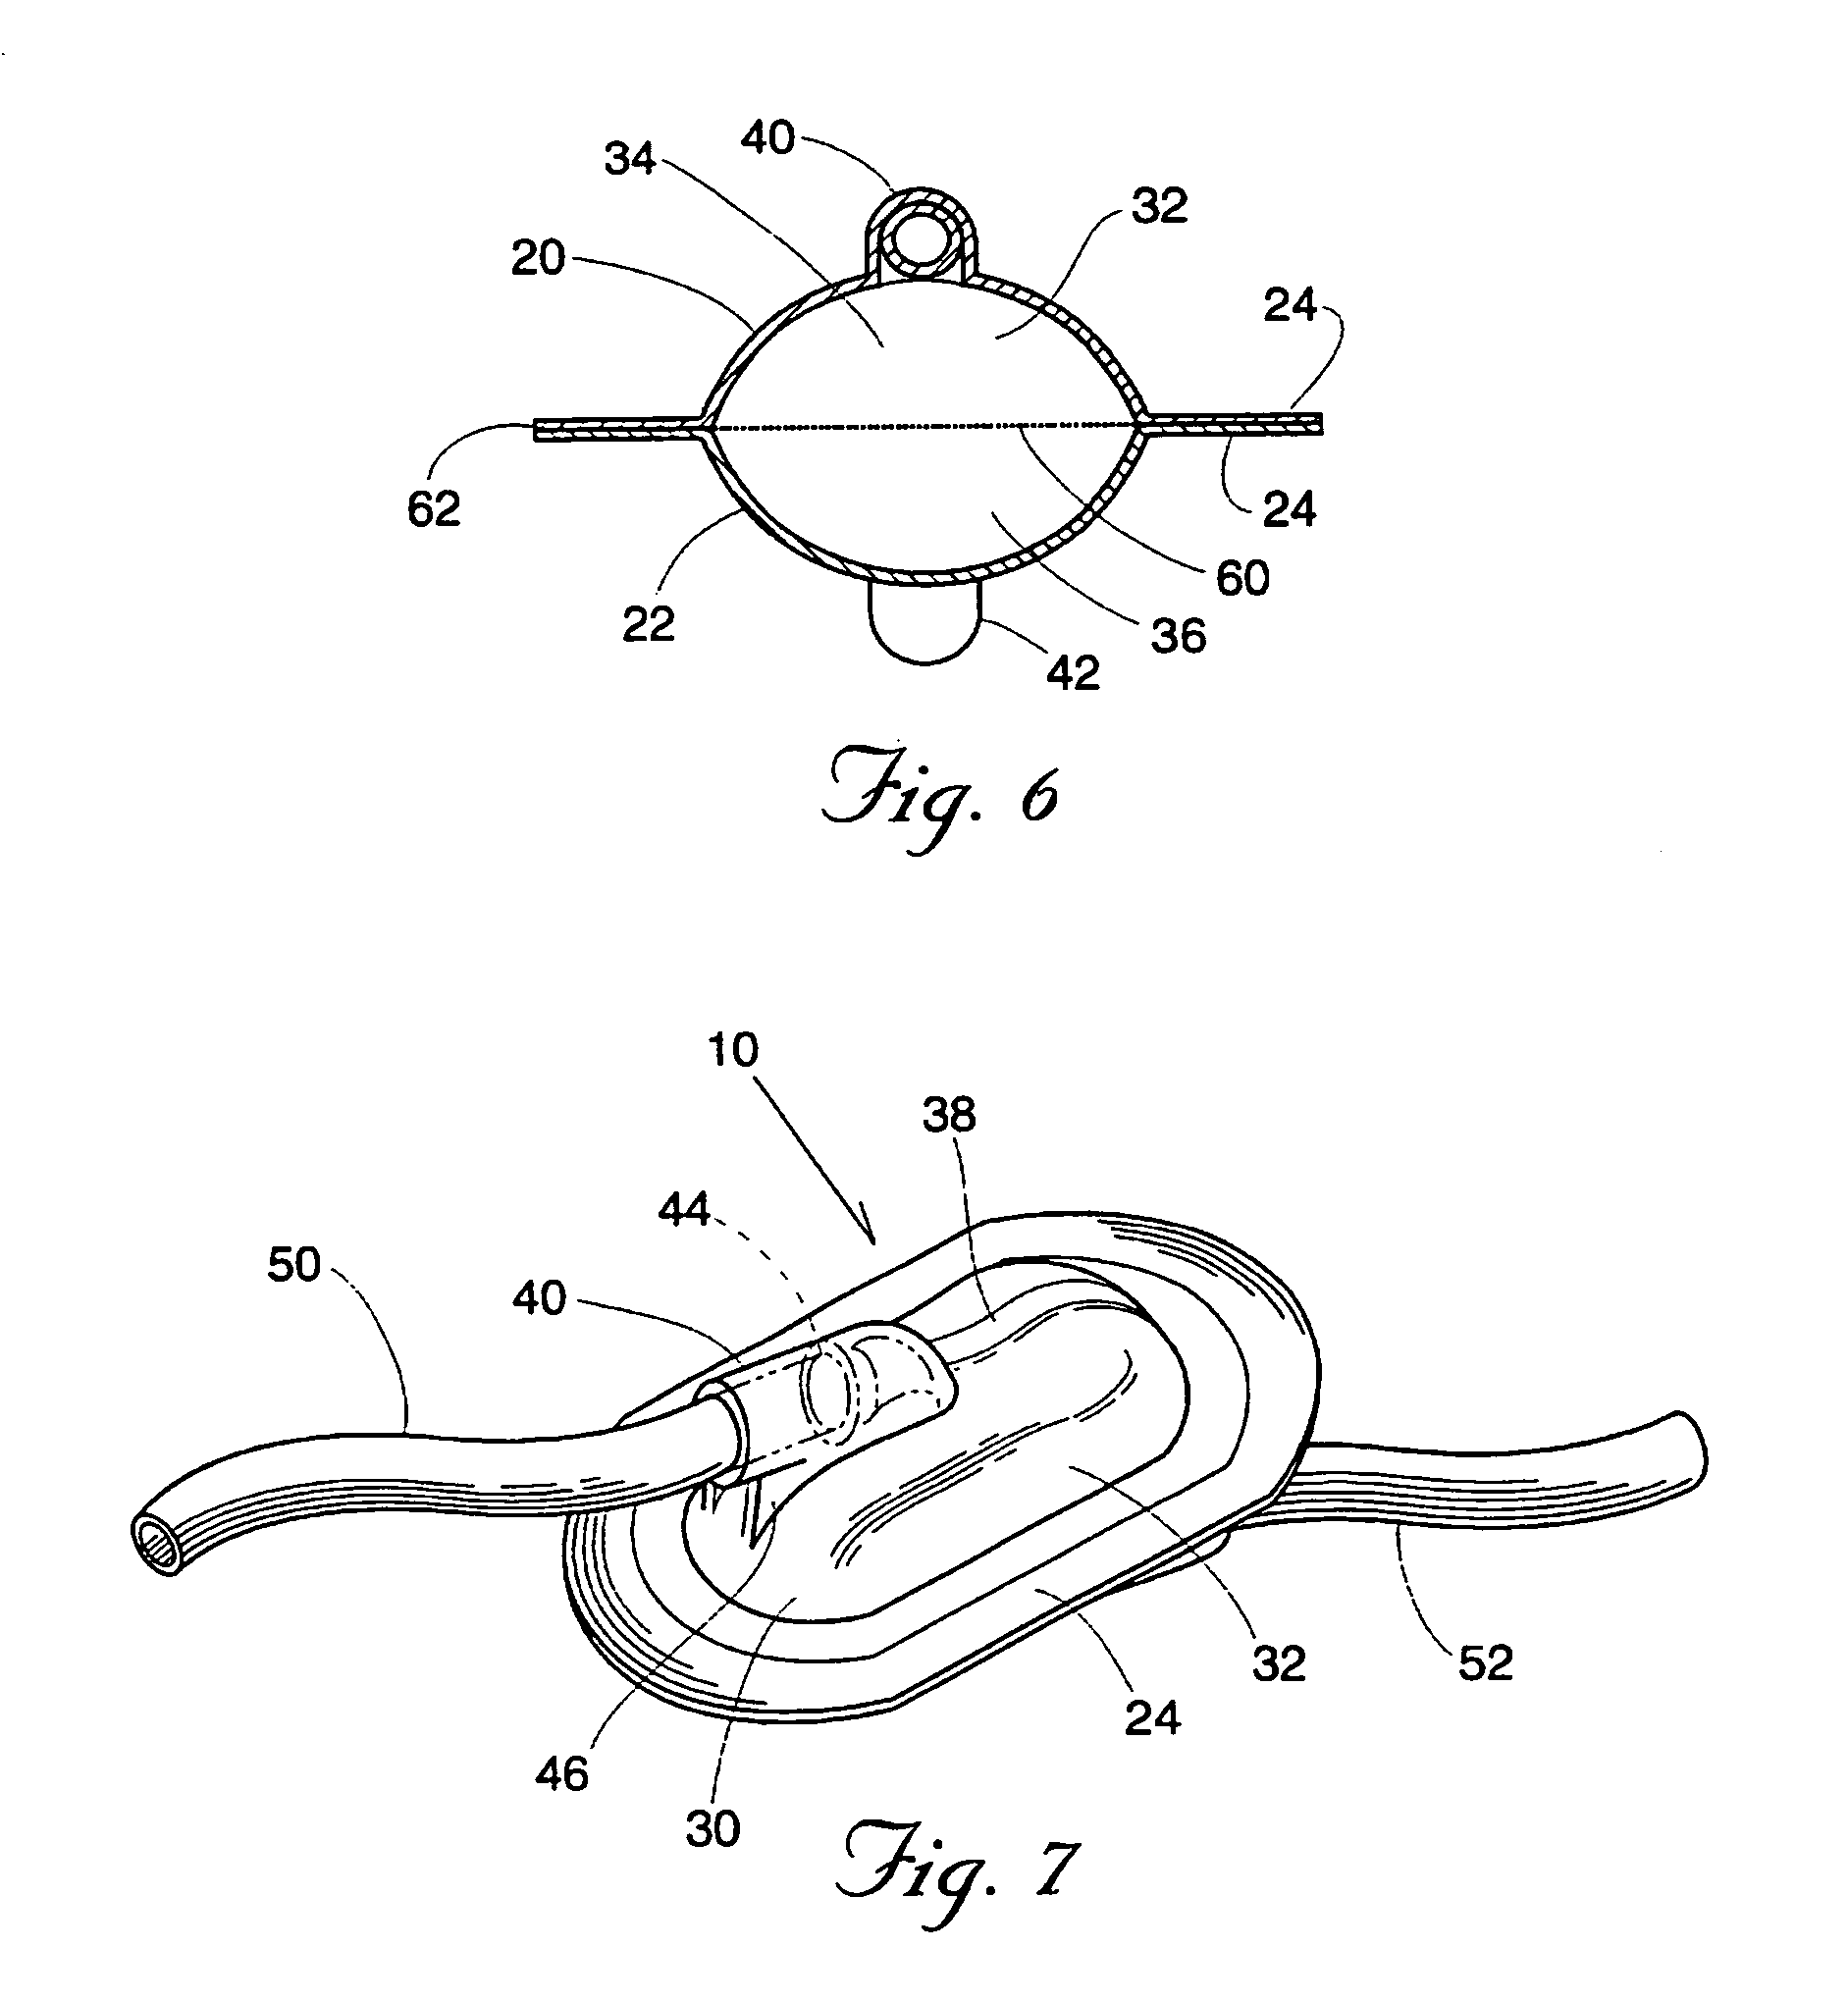 Method of making a filter assembly having a flexible housing